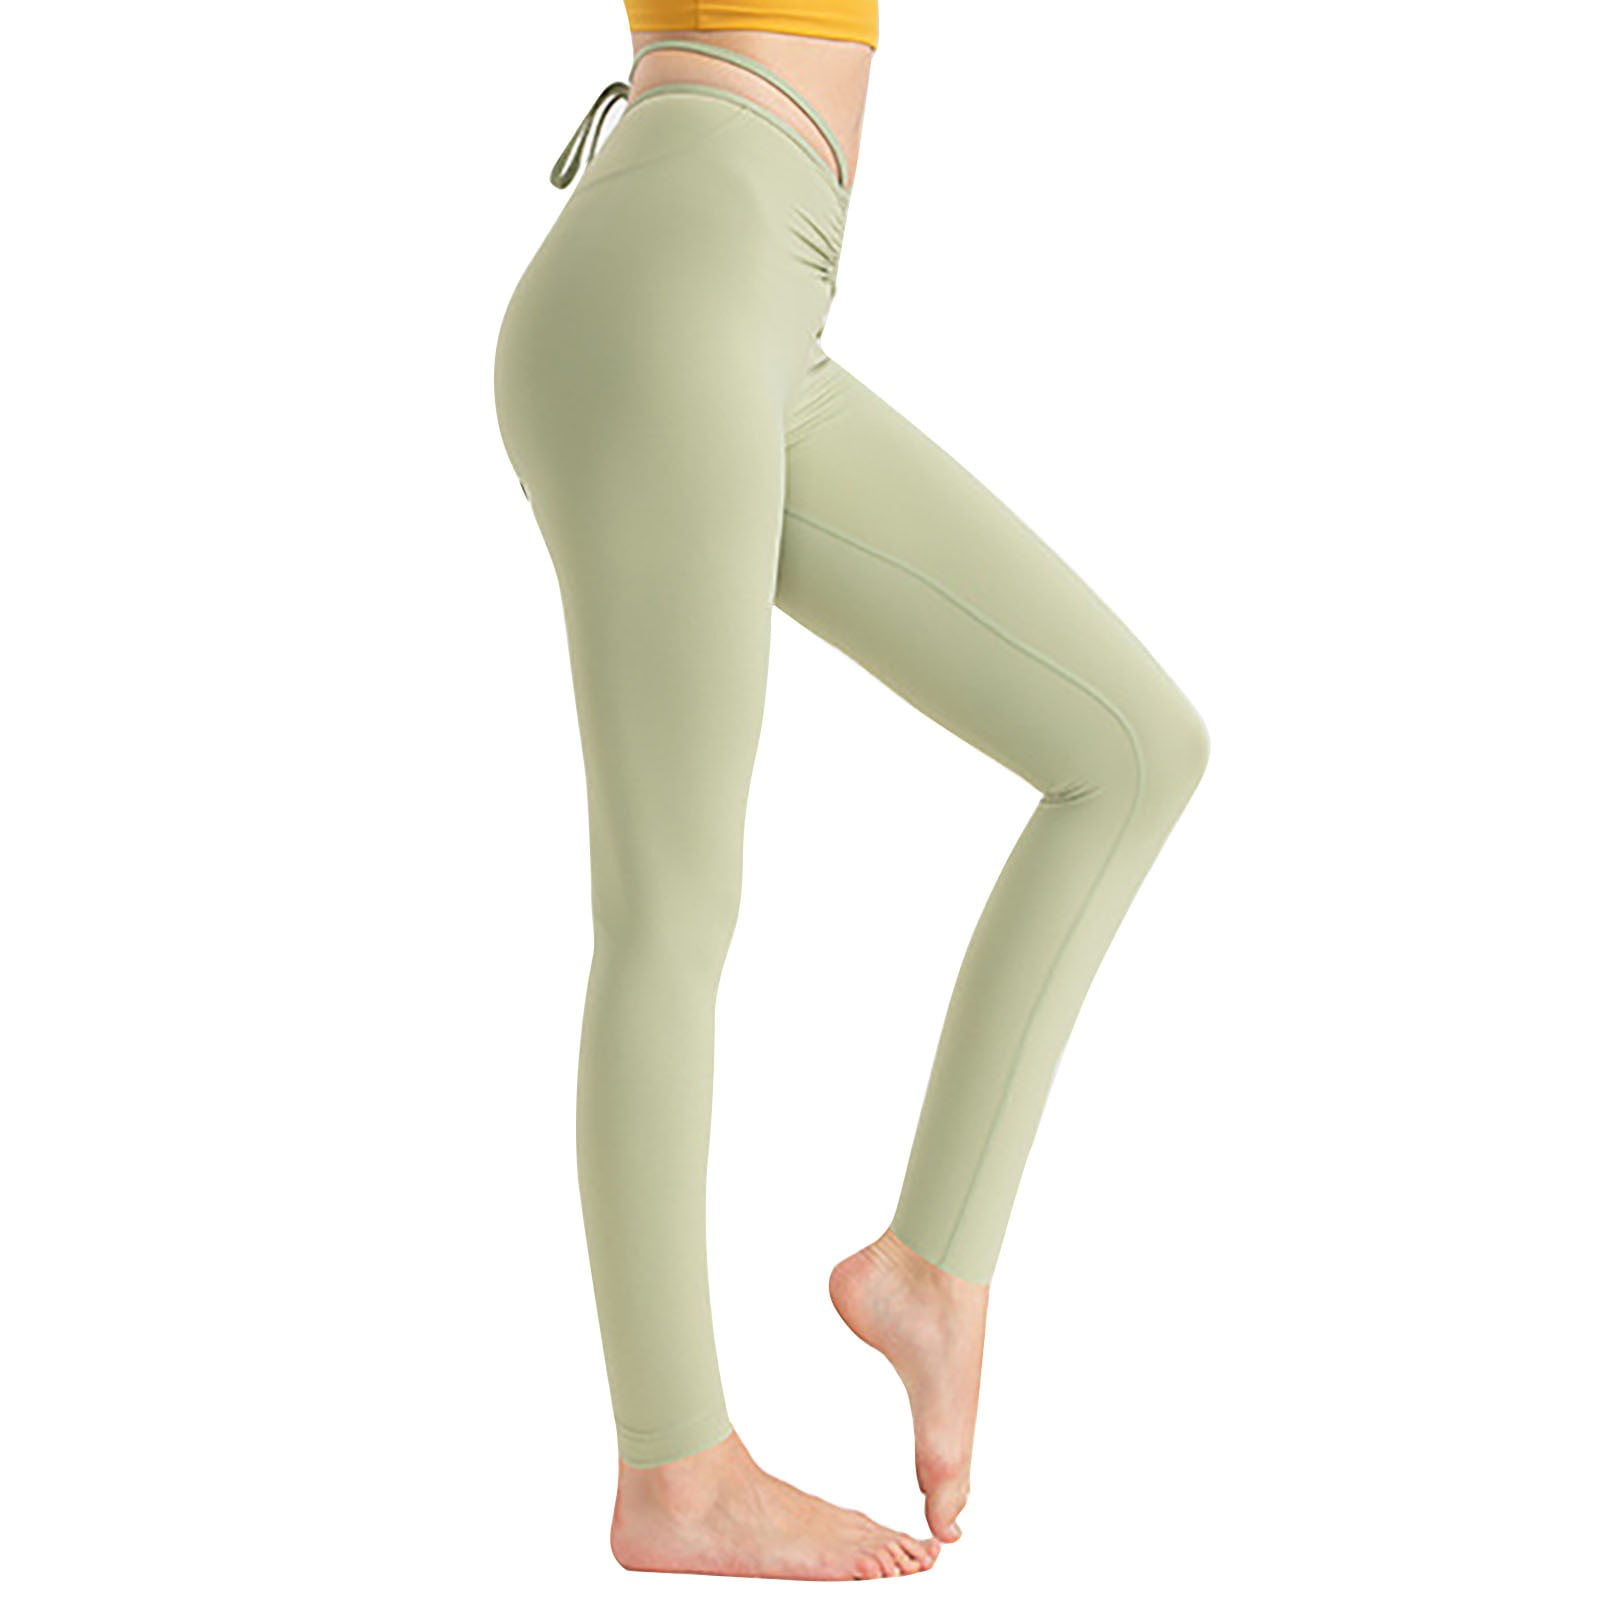 xinqinghao yoga leggings for women leggings with pockets for women non see  through workout high waisted running yoga pants women yoga pants green l 